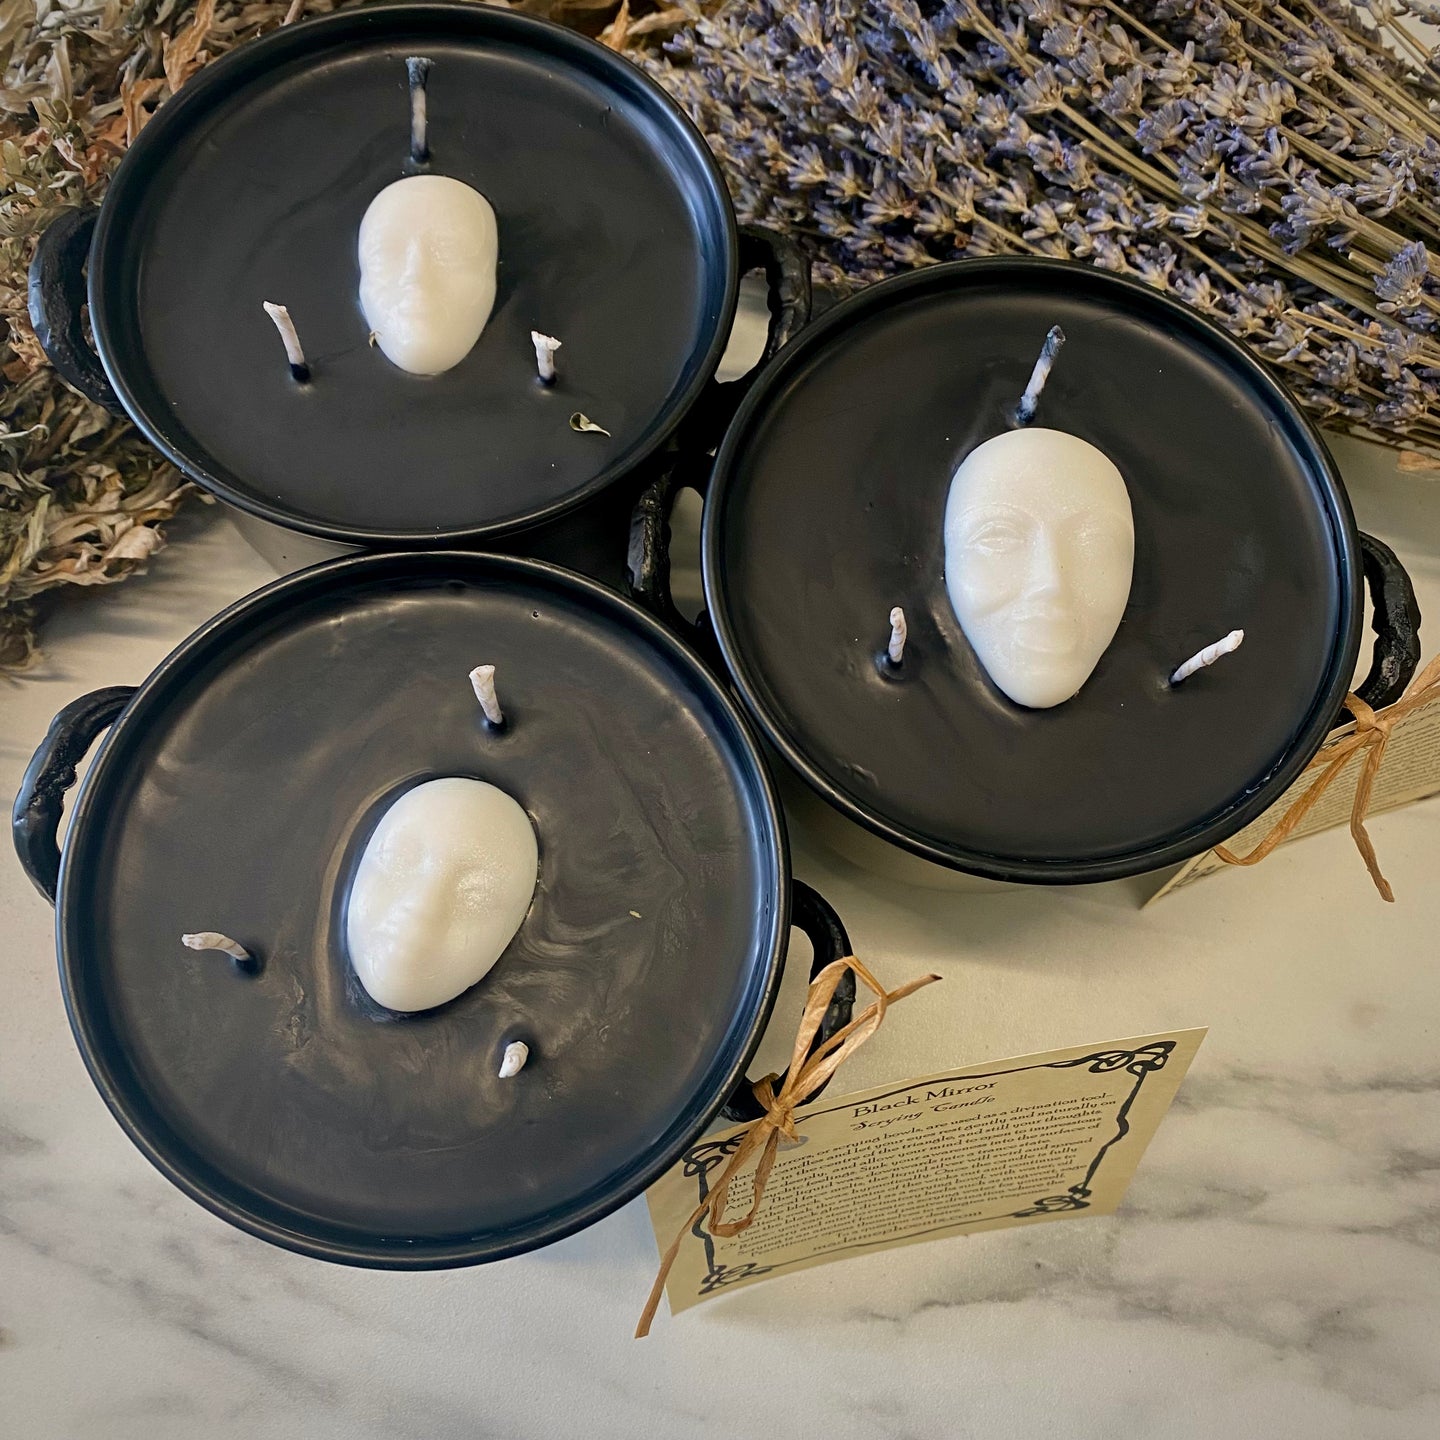 Black Mirror | scrying mirror | scrying bowl | ritual spell candle